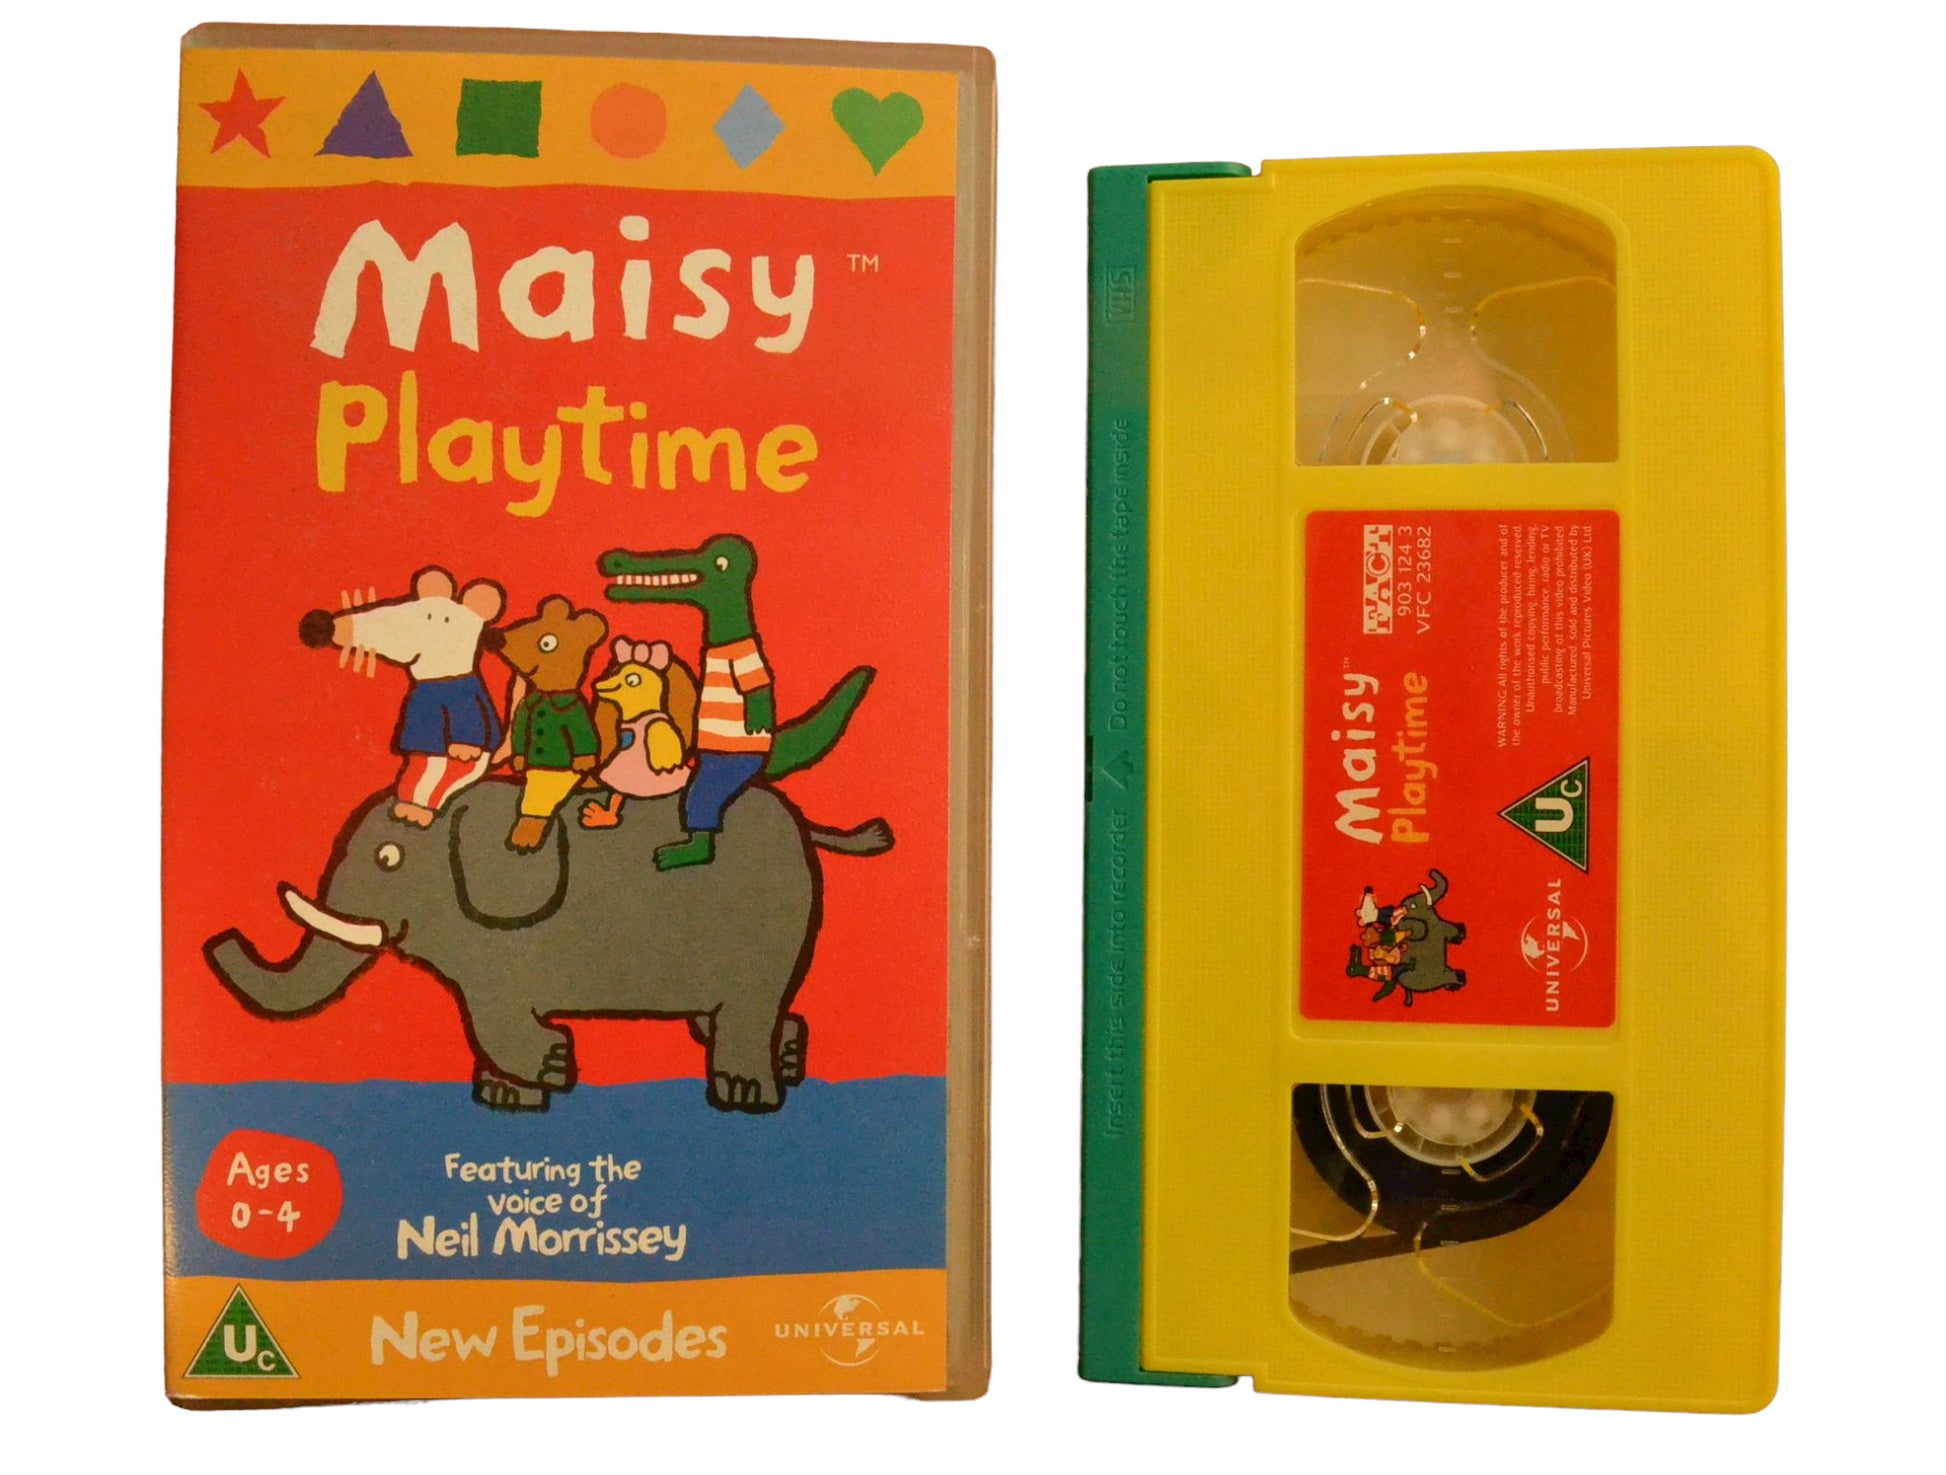 Maisy Playtime (New Episodes) - Universal - Childrens - PAL - VHS-